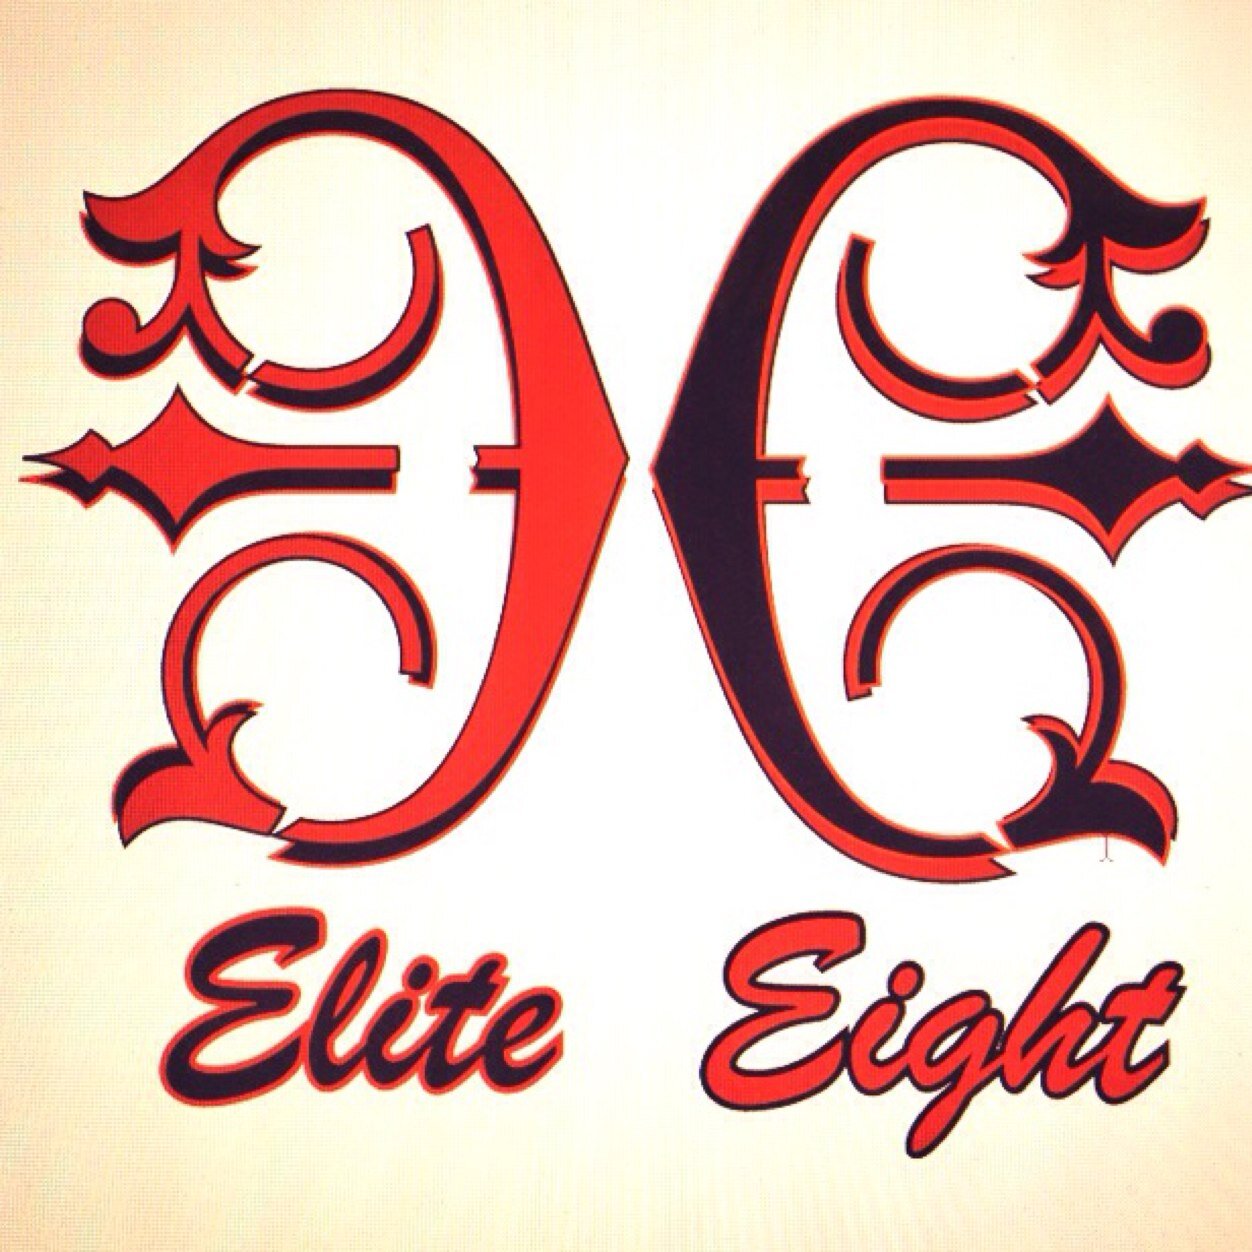 OFFICIAL TWITTER PAGE OF THE ELITE EIGHT PARTY
follow back for details